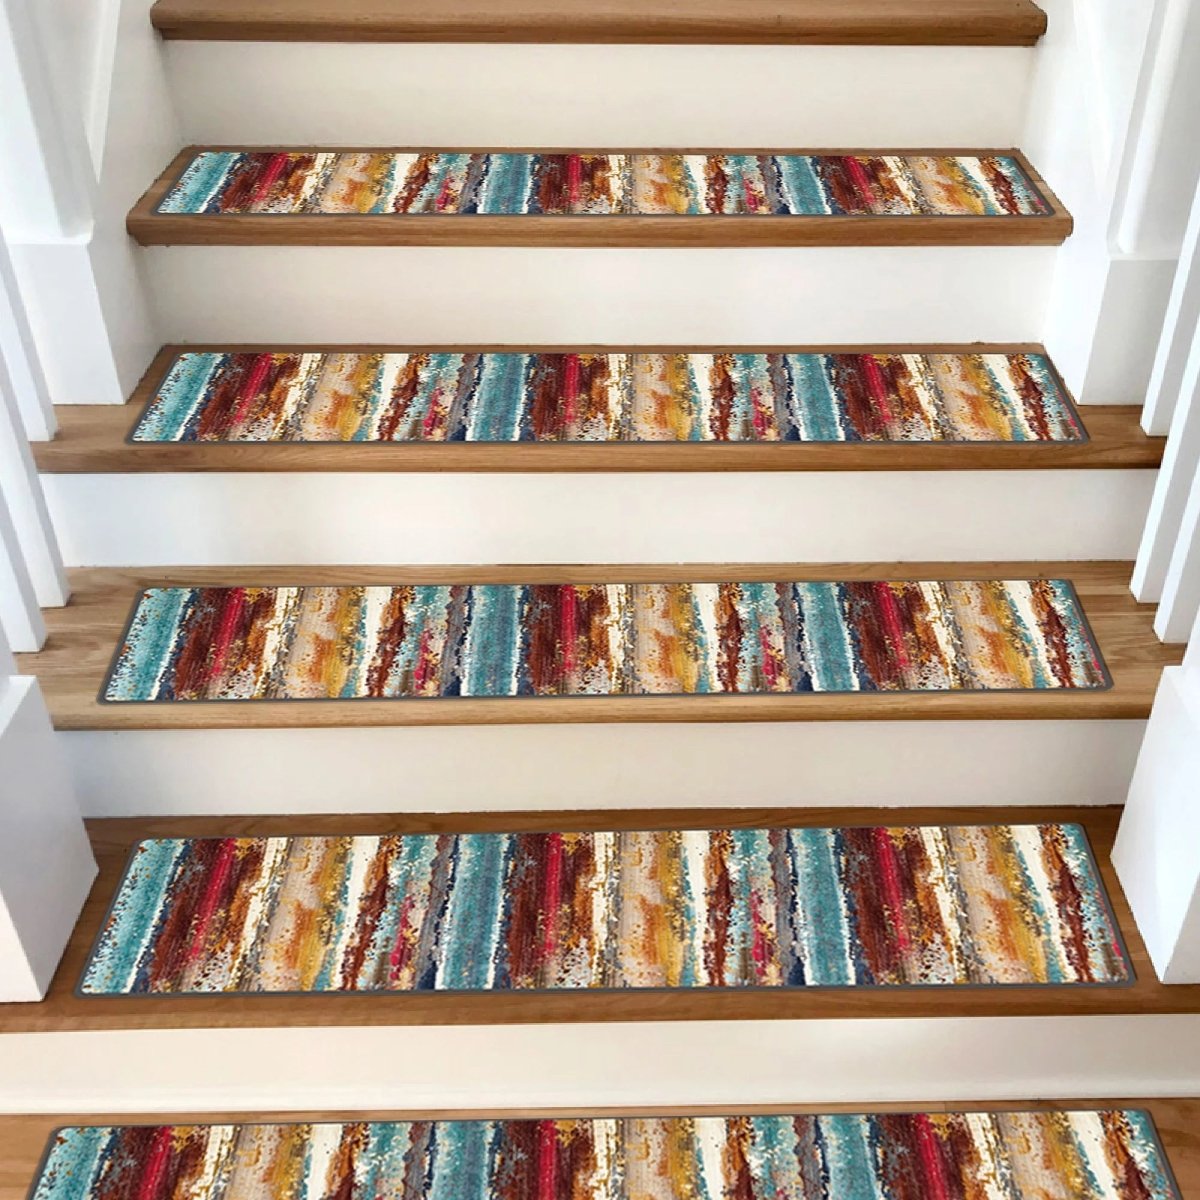 Stair Treads Rug Border, Stairs Carpet, Aesthetic Stairs Runner, Ultra Thin Stair Mat, Modern Step Pad, Non-Slip Treads Rug, Washable Rug, - Slips Away - stair treads - 1540138185_3725353228 -